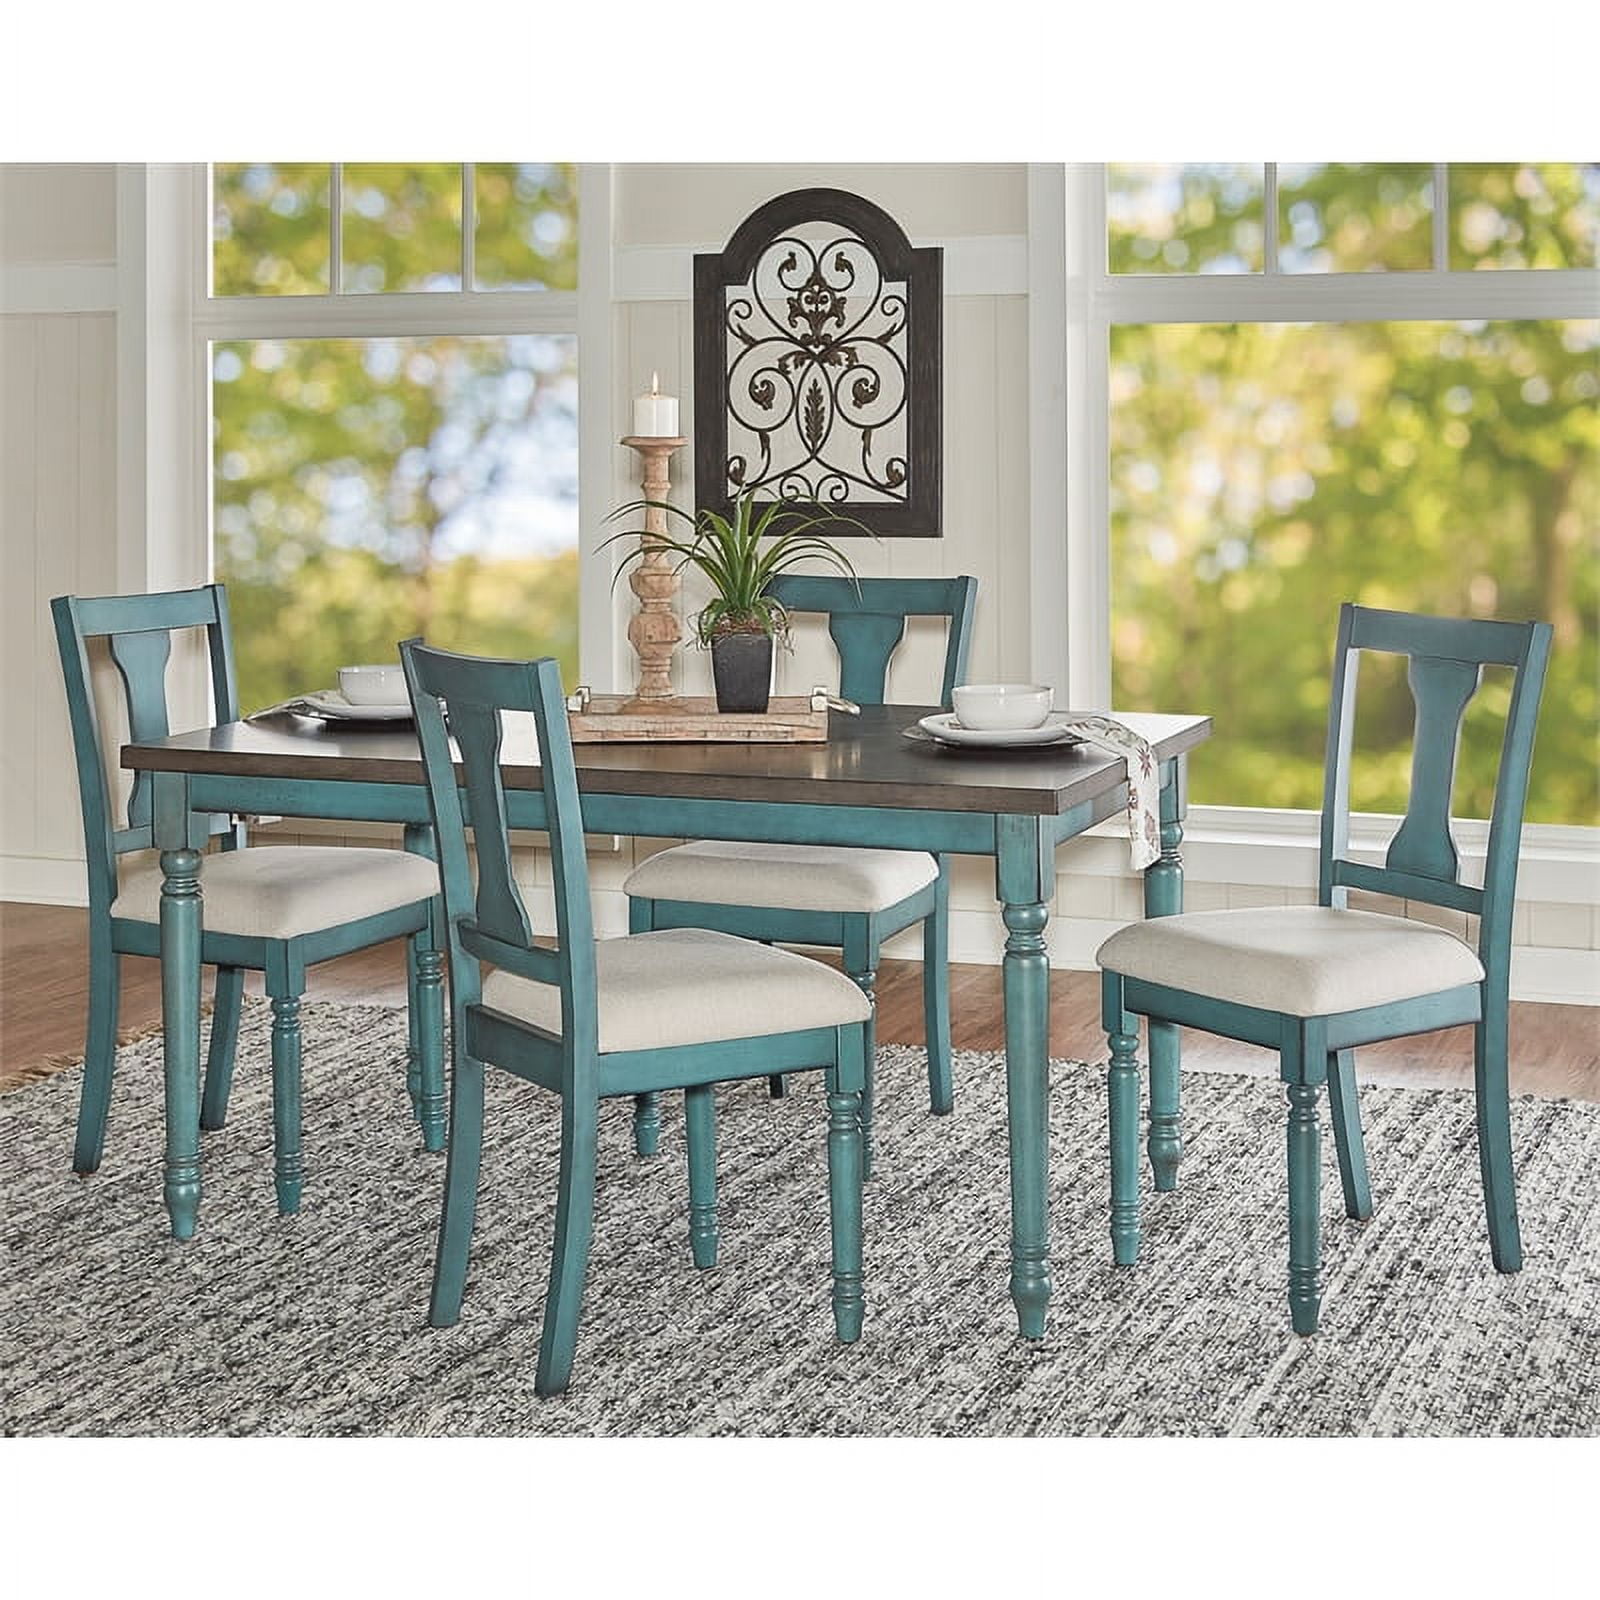 Spring Cottage 5 Pc Blue Colors Dining Room Set With Counter